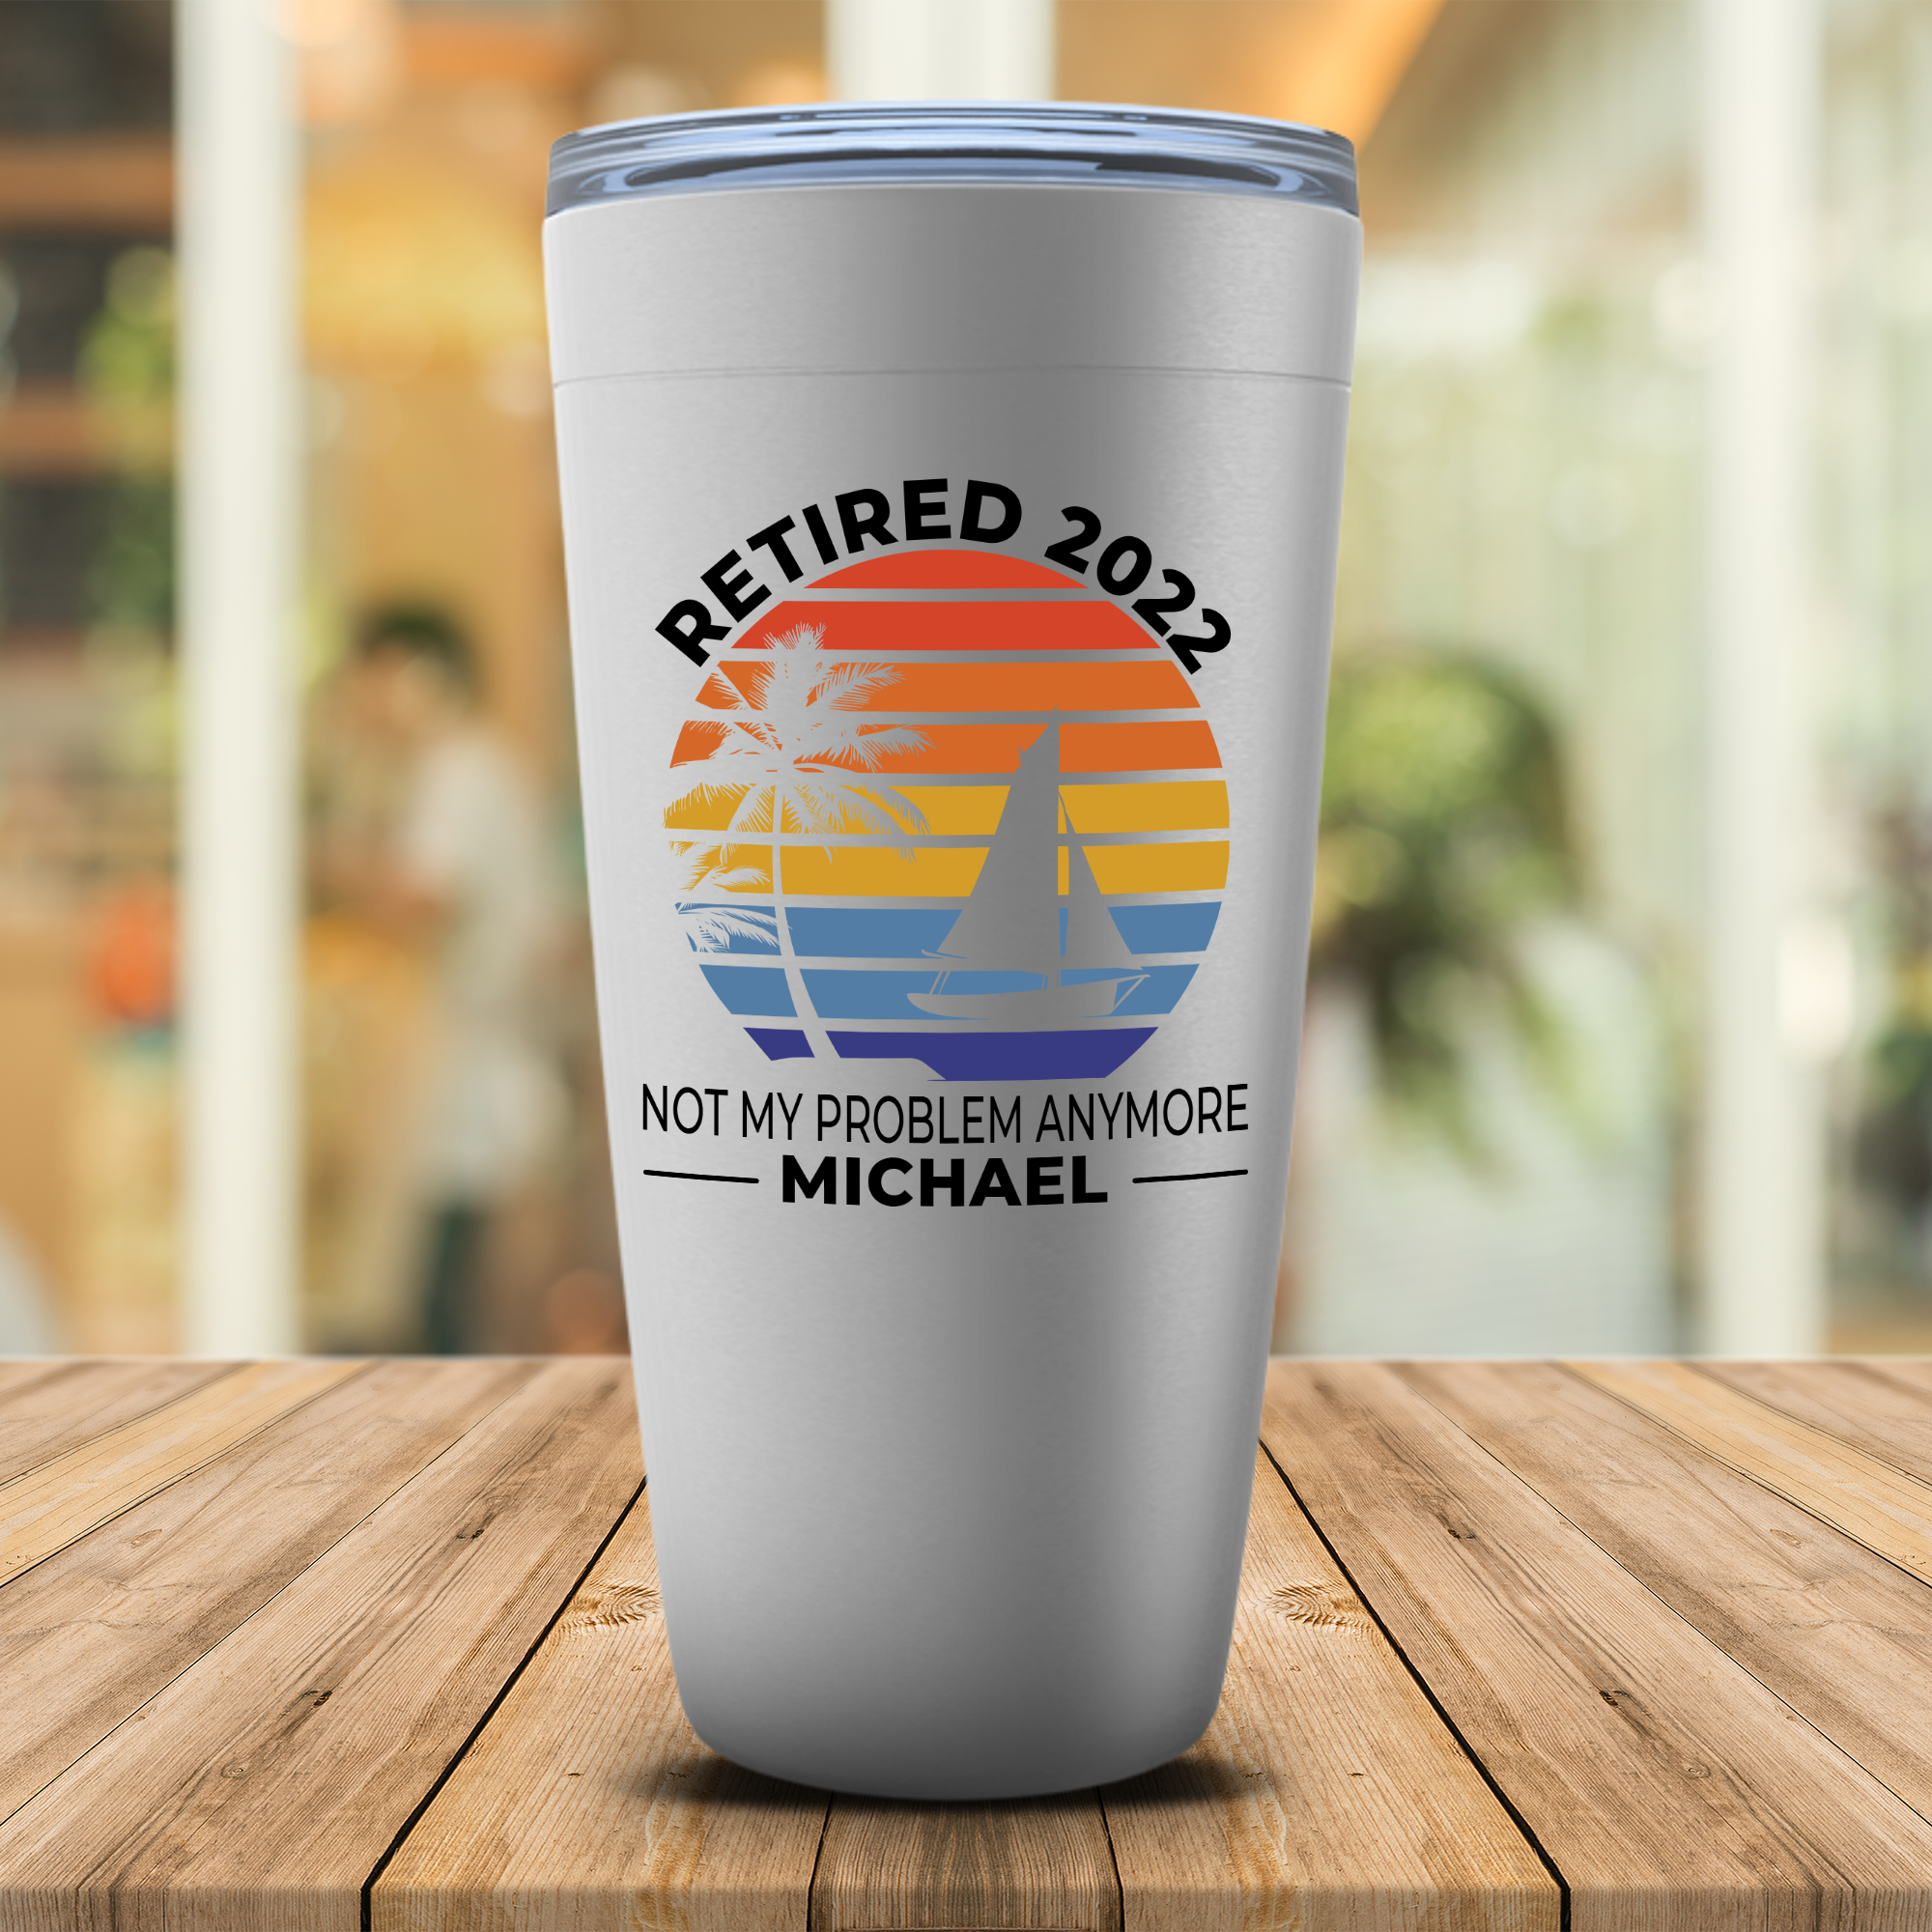 Retirement Gifts for Men Funny Tumbler Retiring Gift Ideas for Coworkers,  Boss, Dad, Friends Stainless Steel Matte Black 20 Oz Tumbler with Lid,  Water Bottle, Travel Coffee Mug Cups 